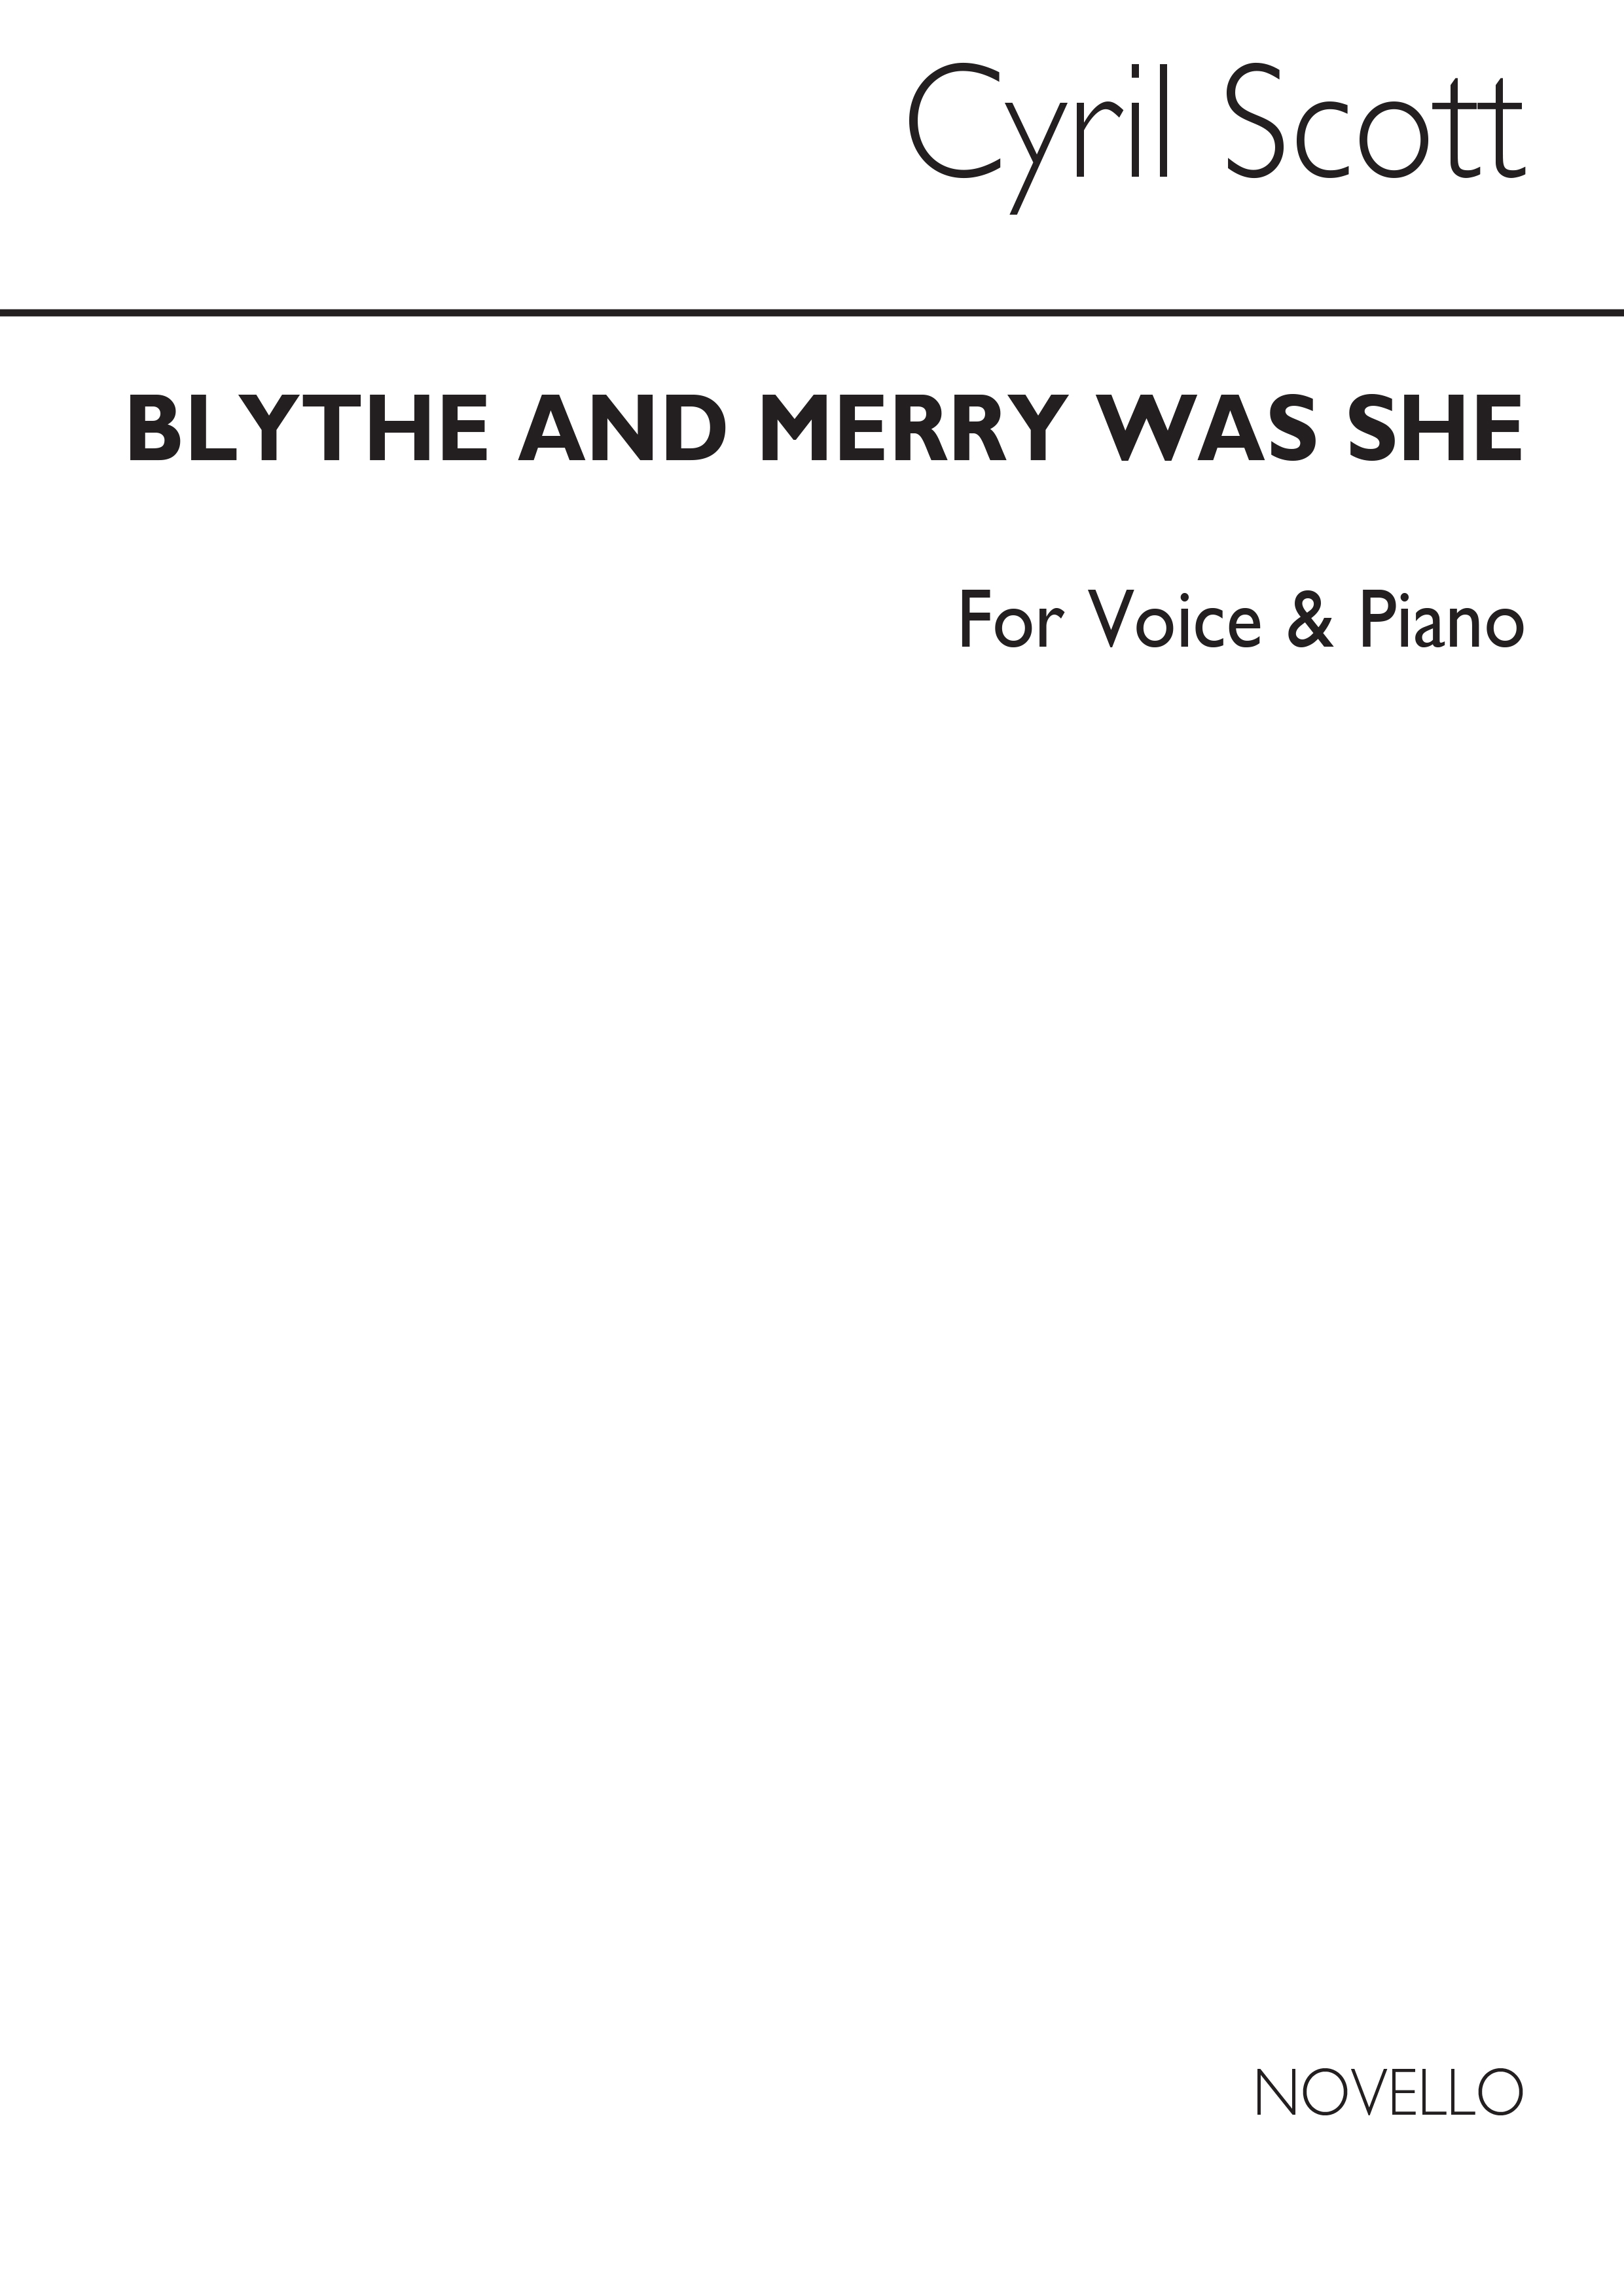 Cyril Scott: Blythe And Merry Was She Voice/Piano: Voice: Vocal Work